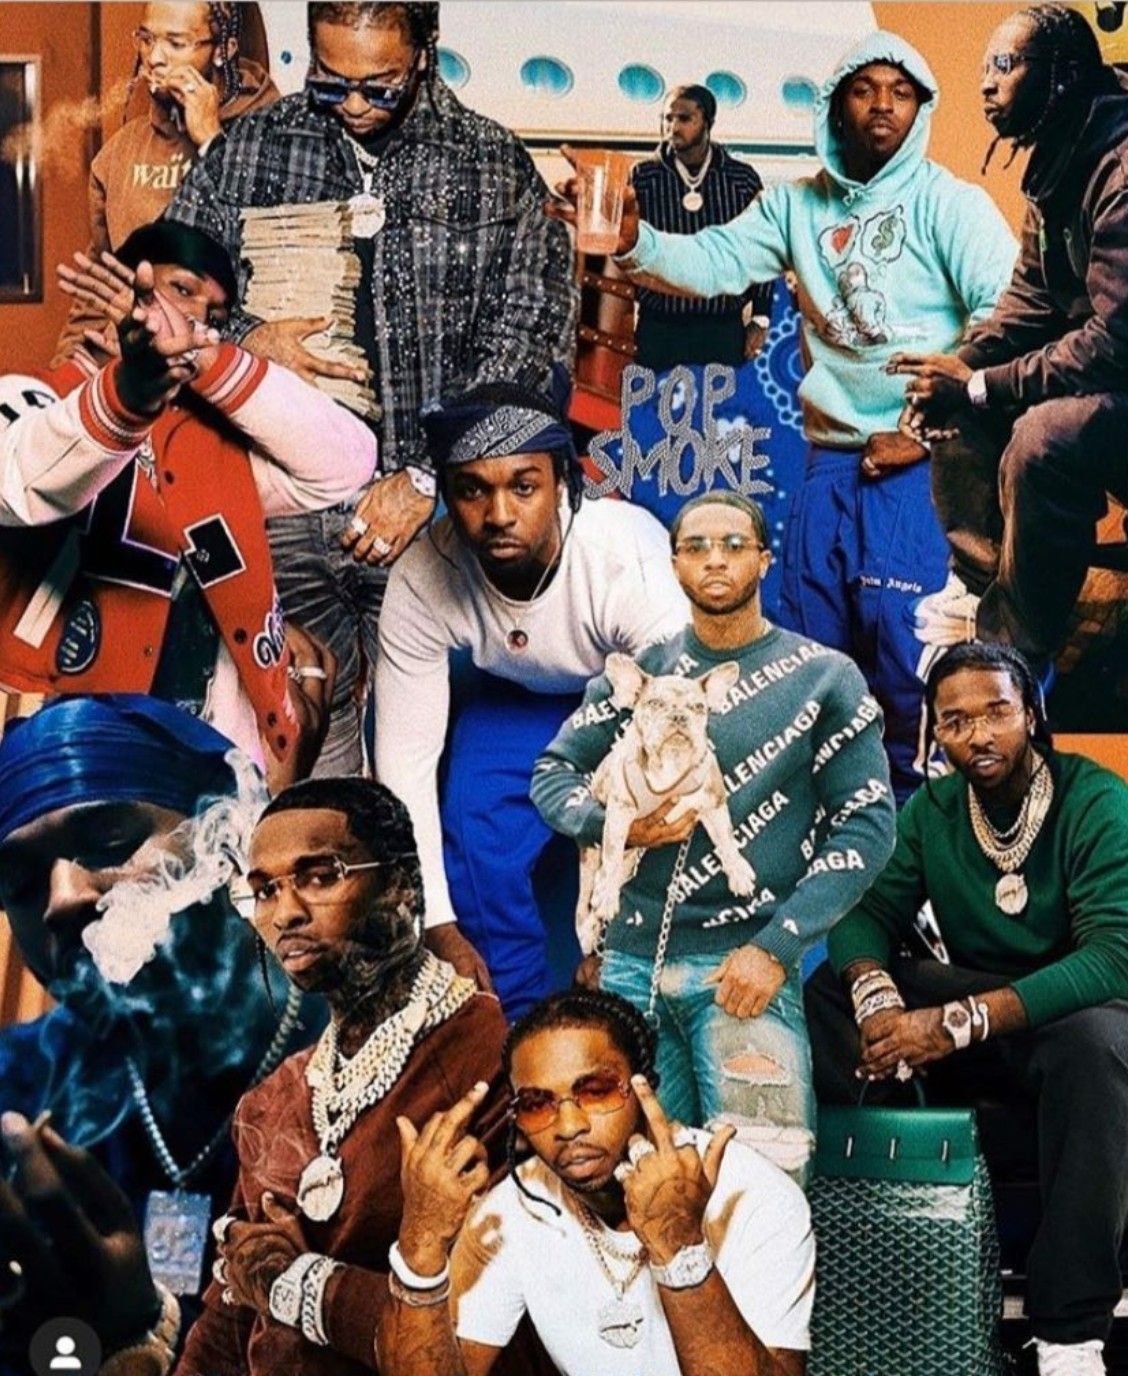 A group of rappers posing for a photo - Pop Smoke